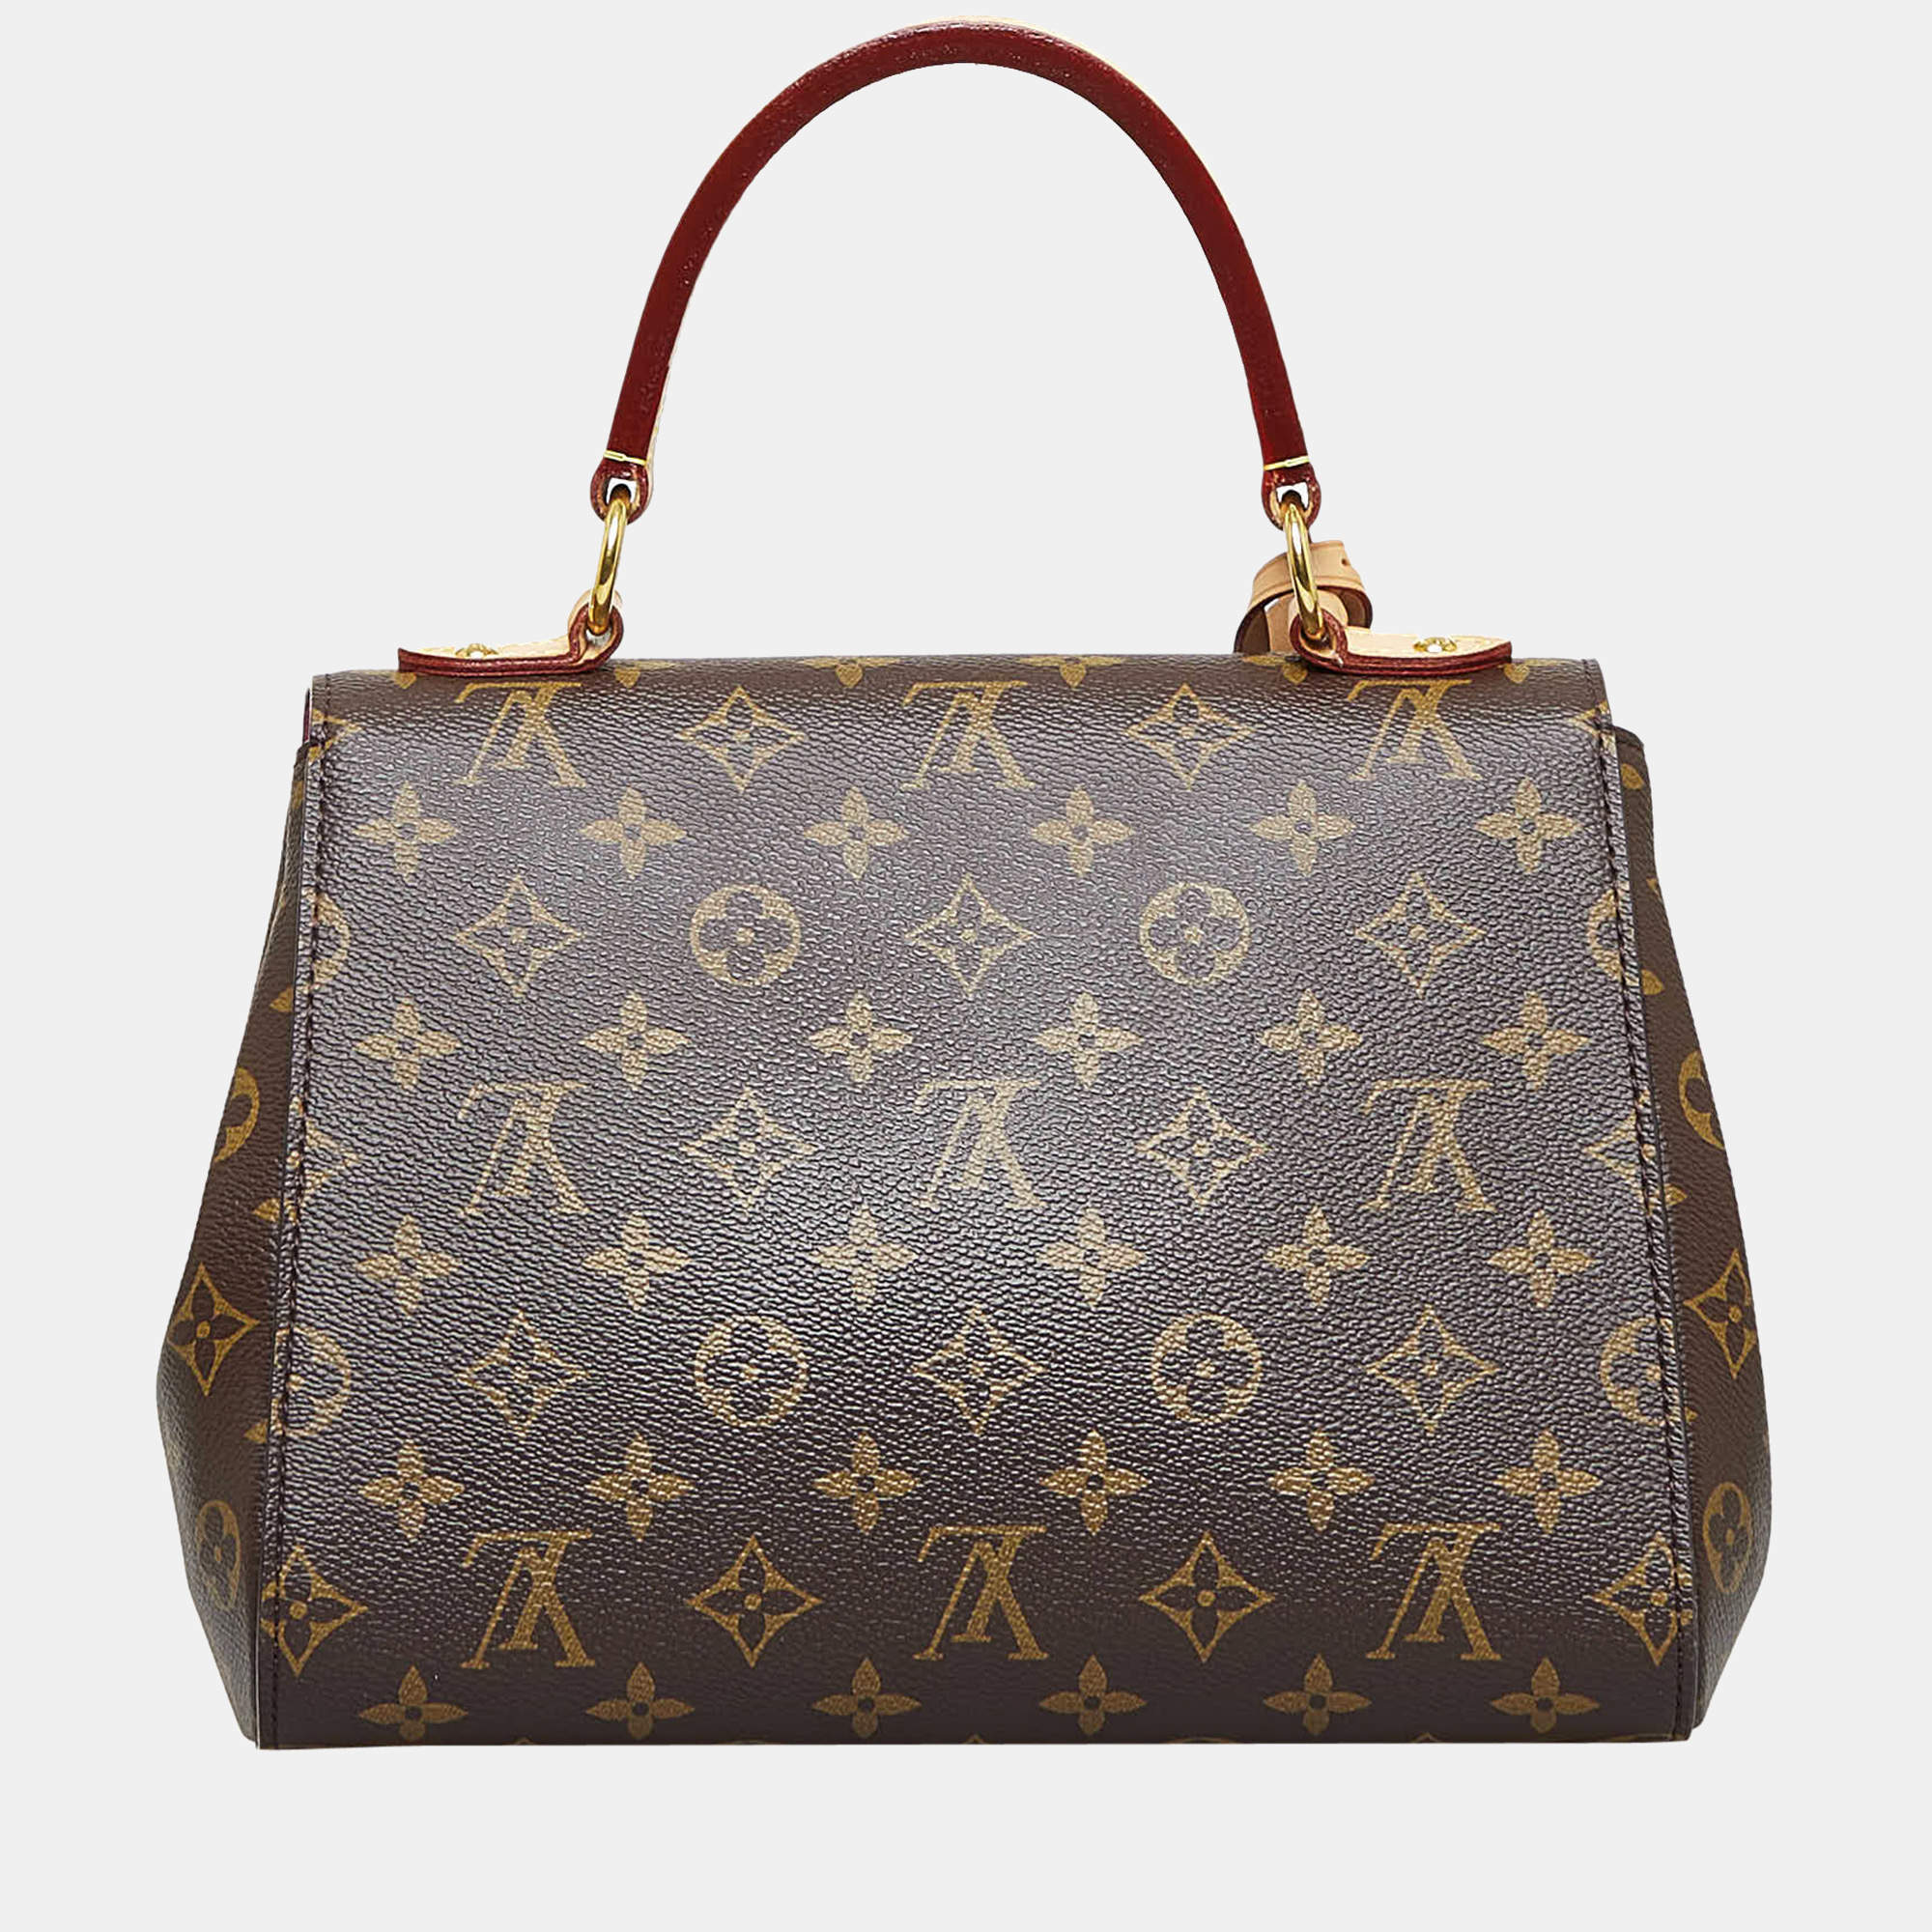 Products by Louis Vuitton: Cluny BB